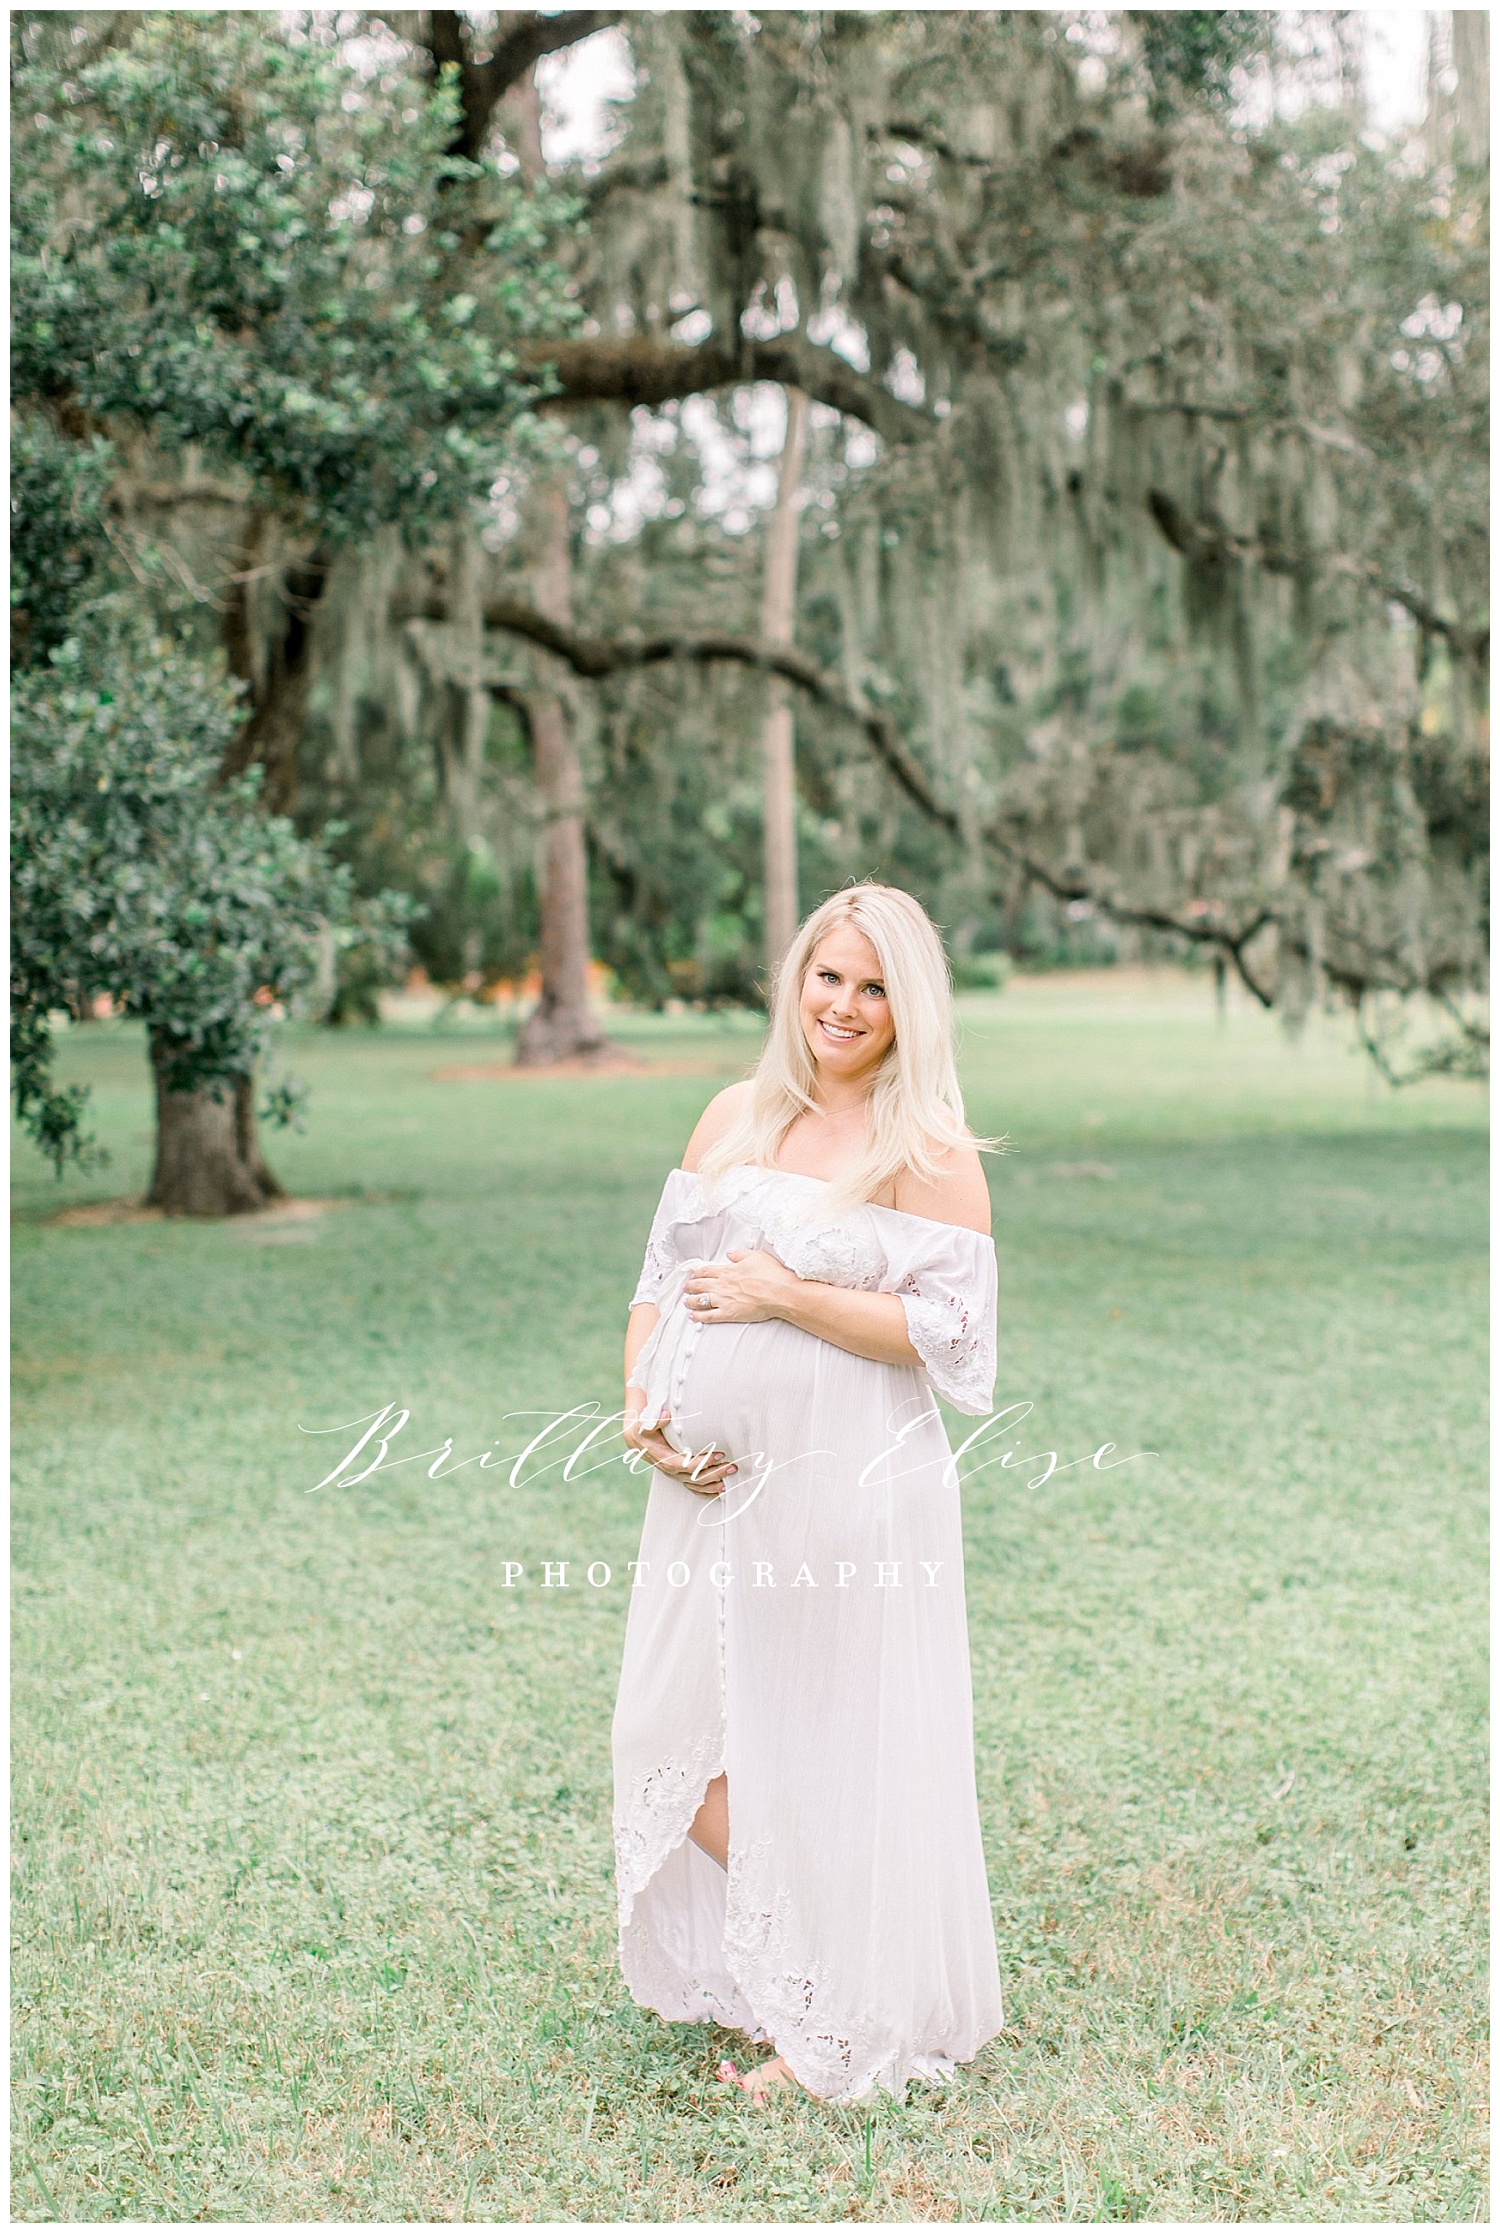 Tampa Outdoor Maternity Photographer